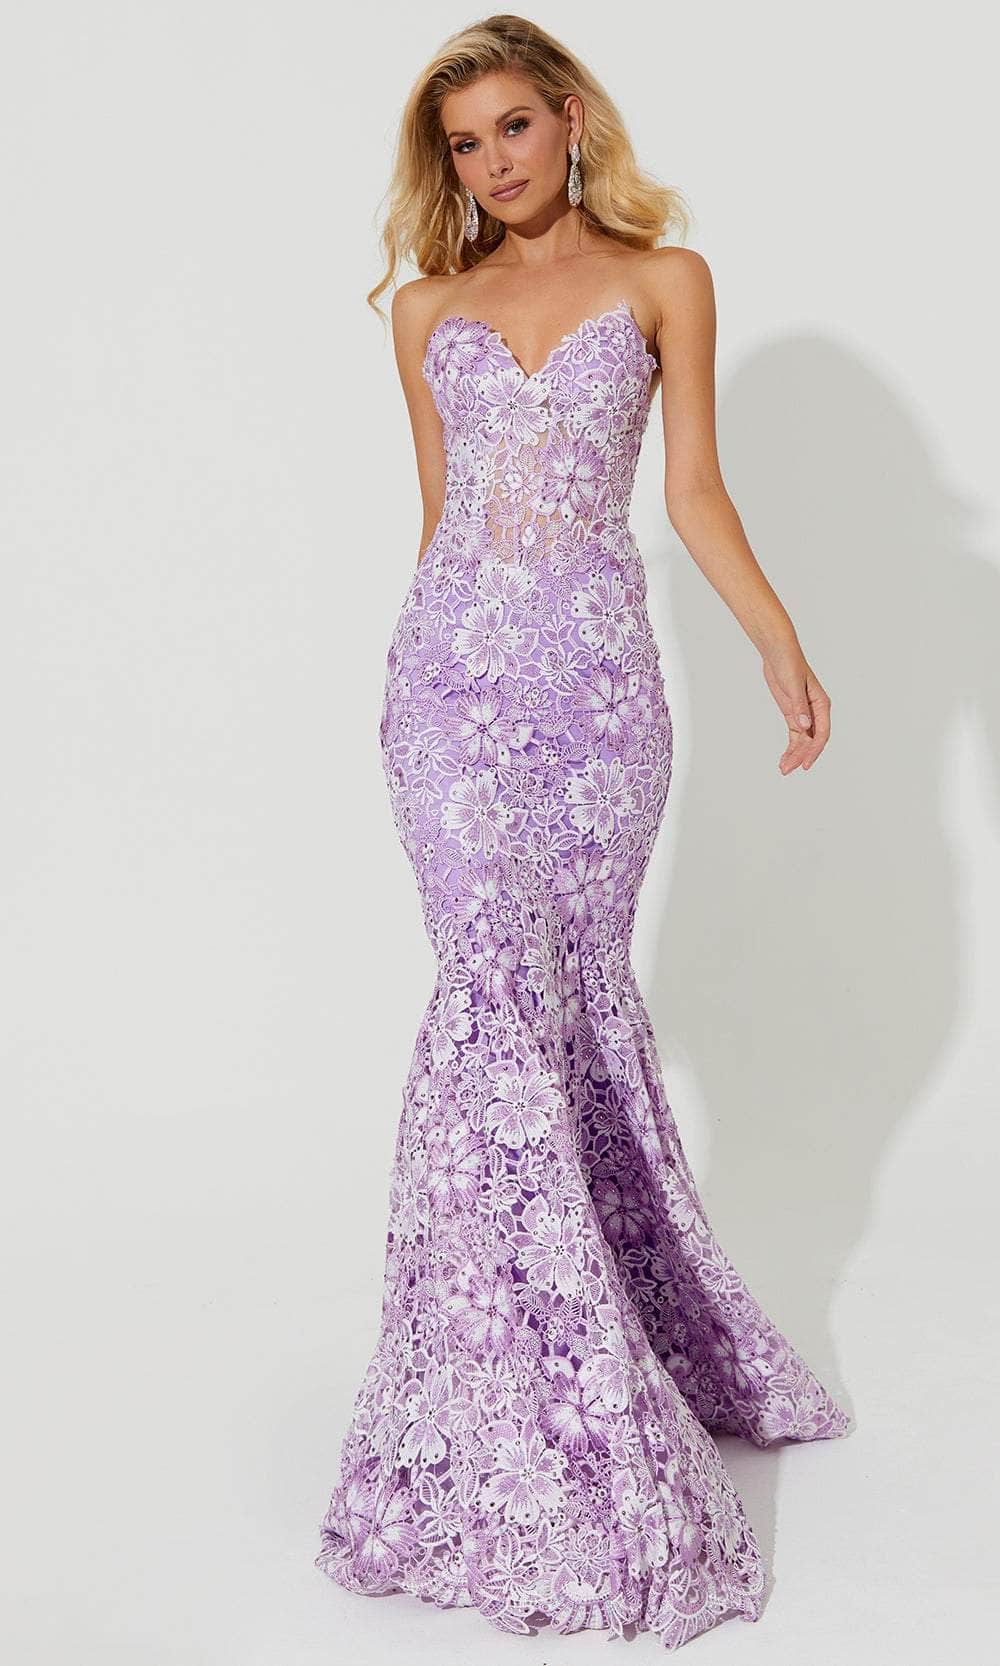 Image of Jasz Couture 7535 - Floral Lace Mermaid Prom Dress